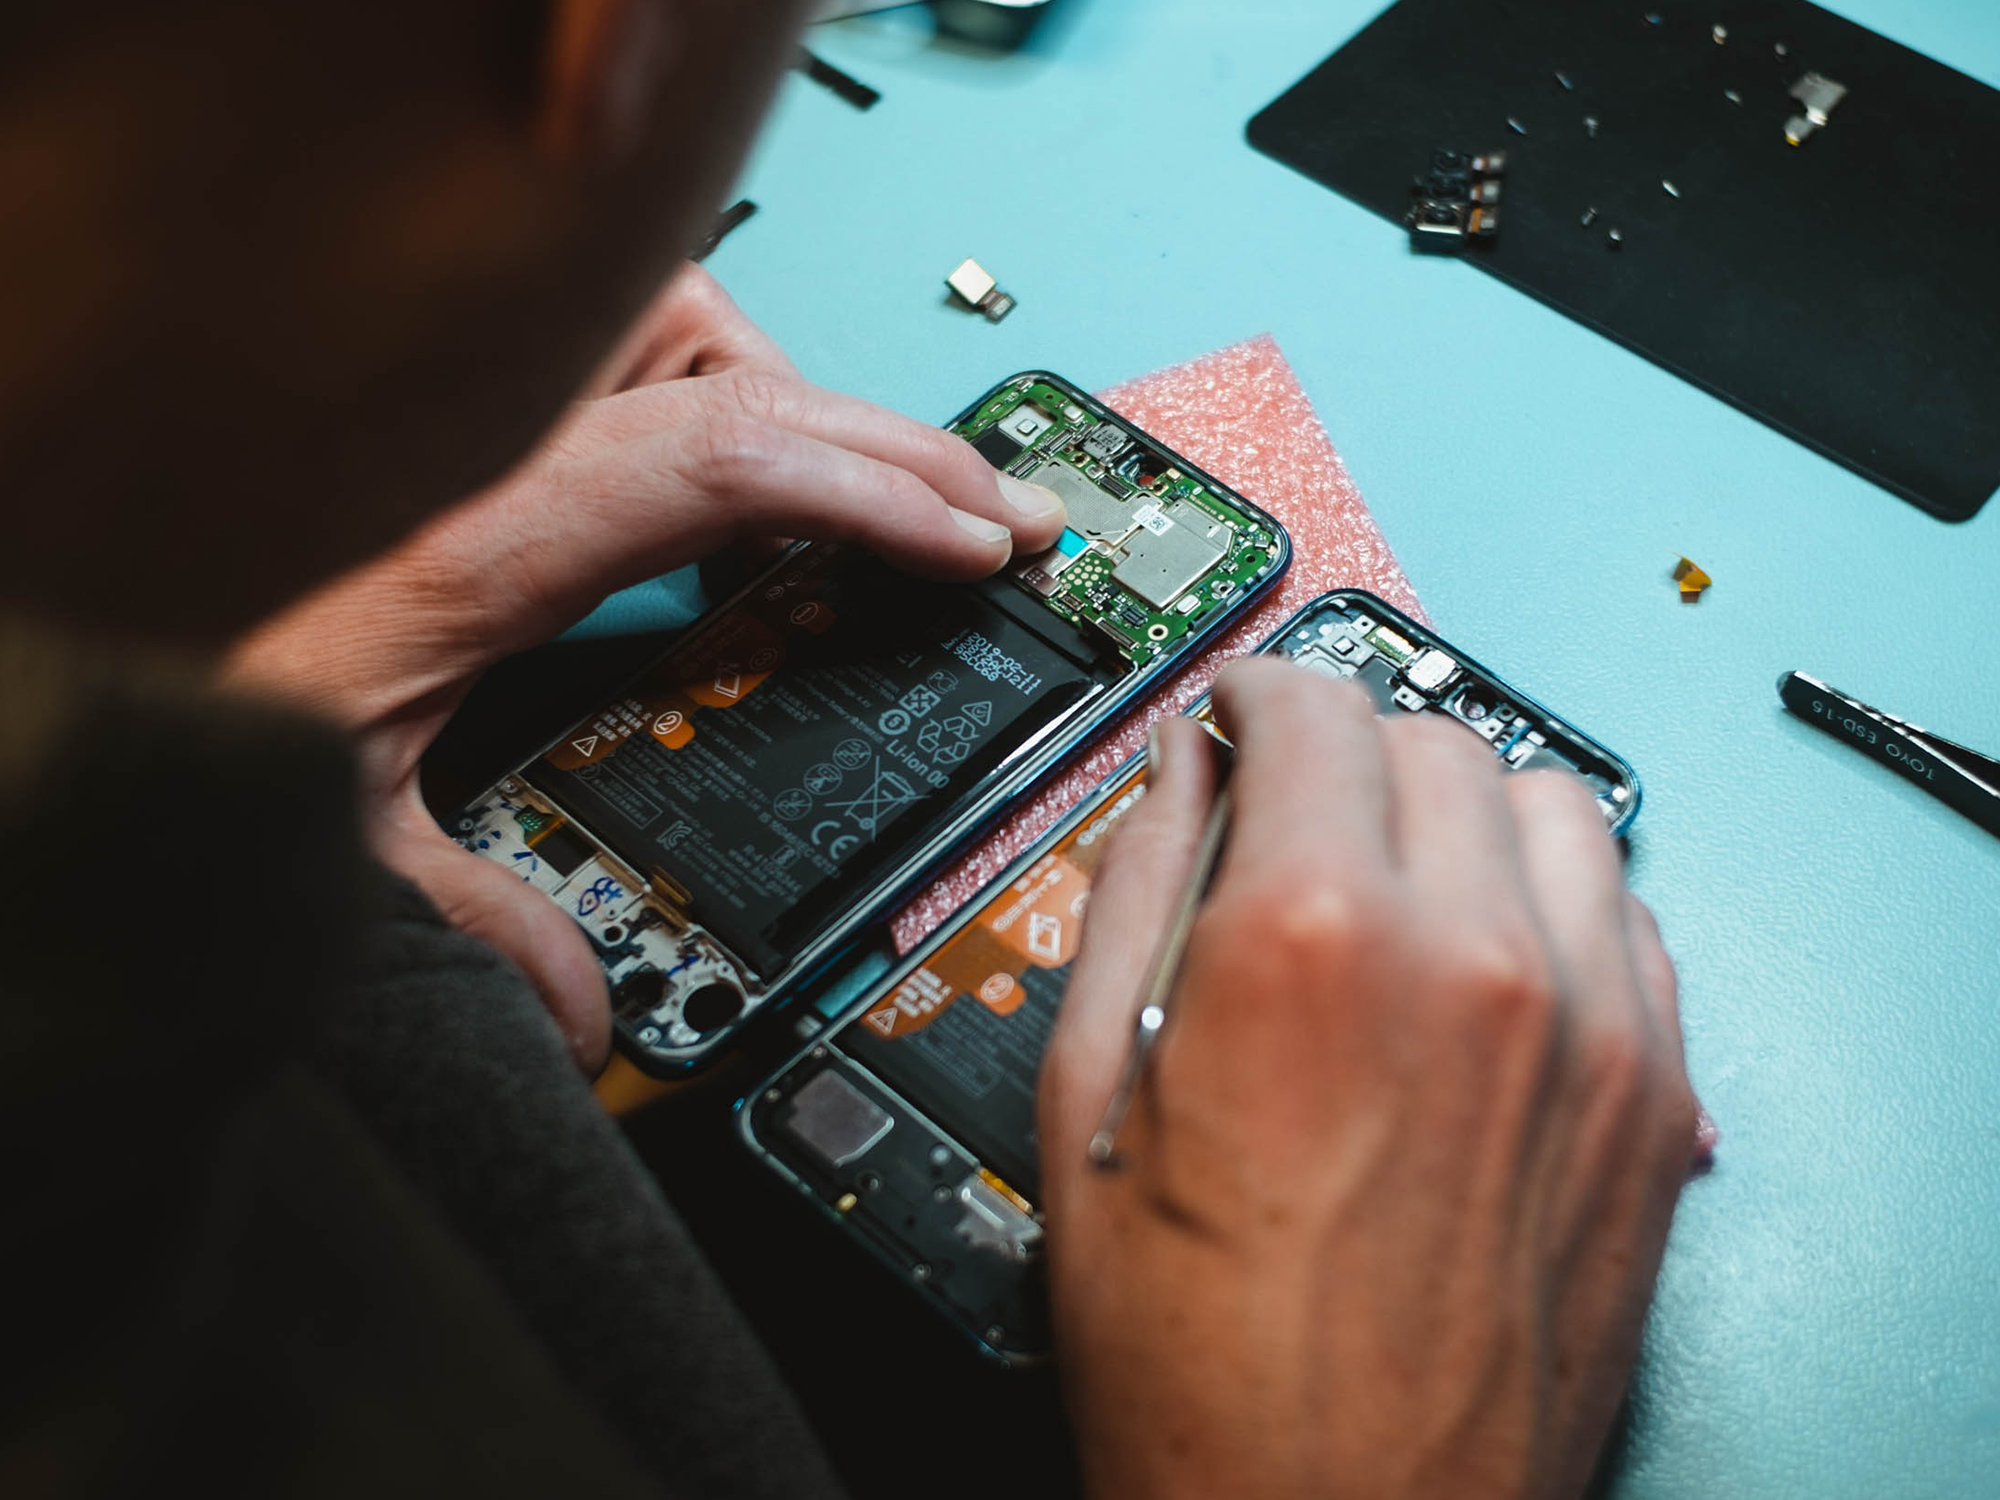 When your devices need repairs, here’s where to start